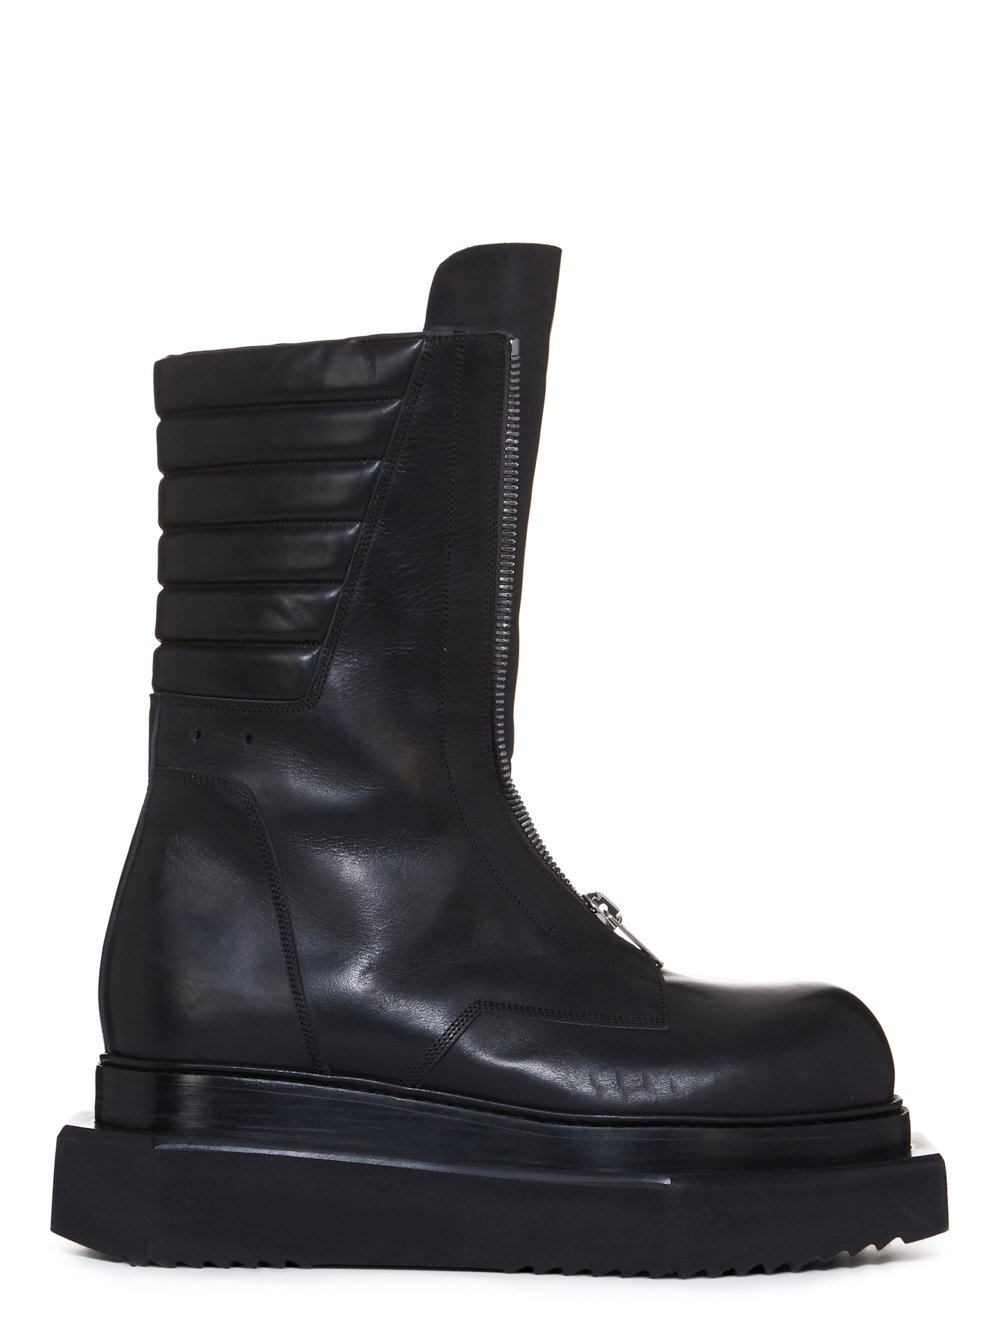 RICK OWENS FW23 LUXOR MOTO CYCLOPS IN BLACK GROPPONE COW LEATHER